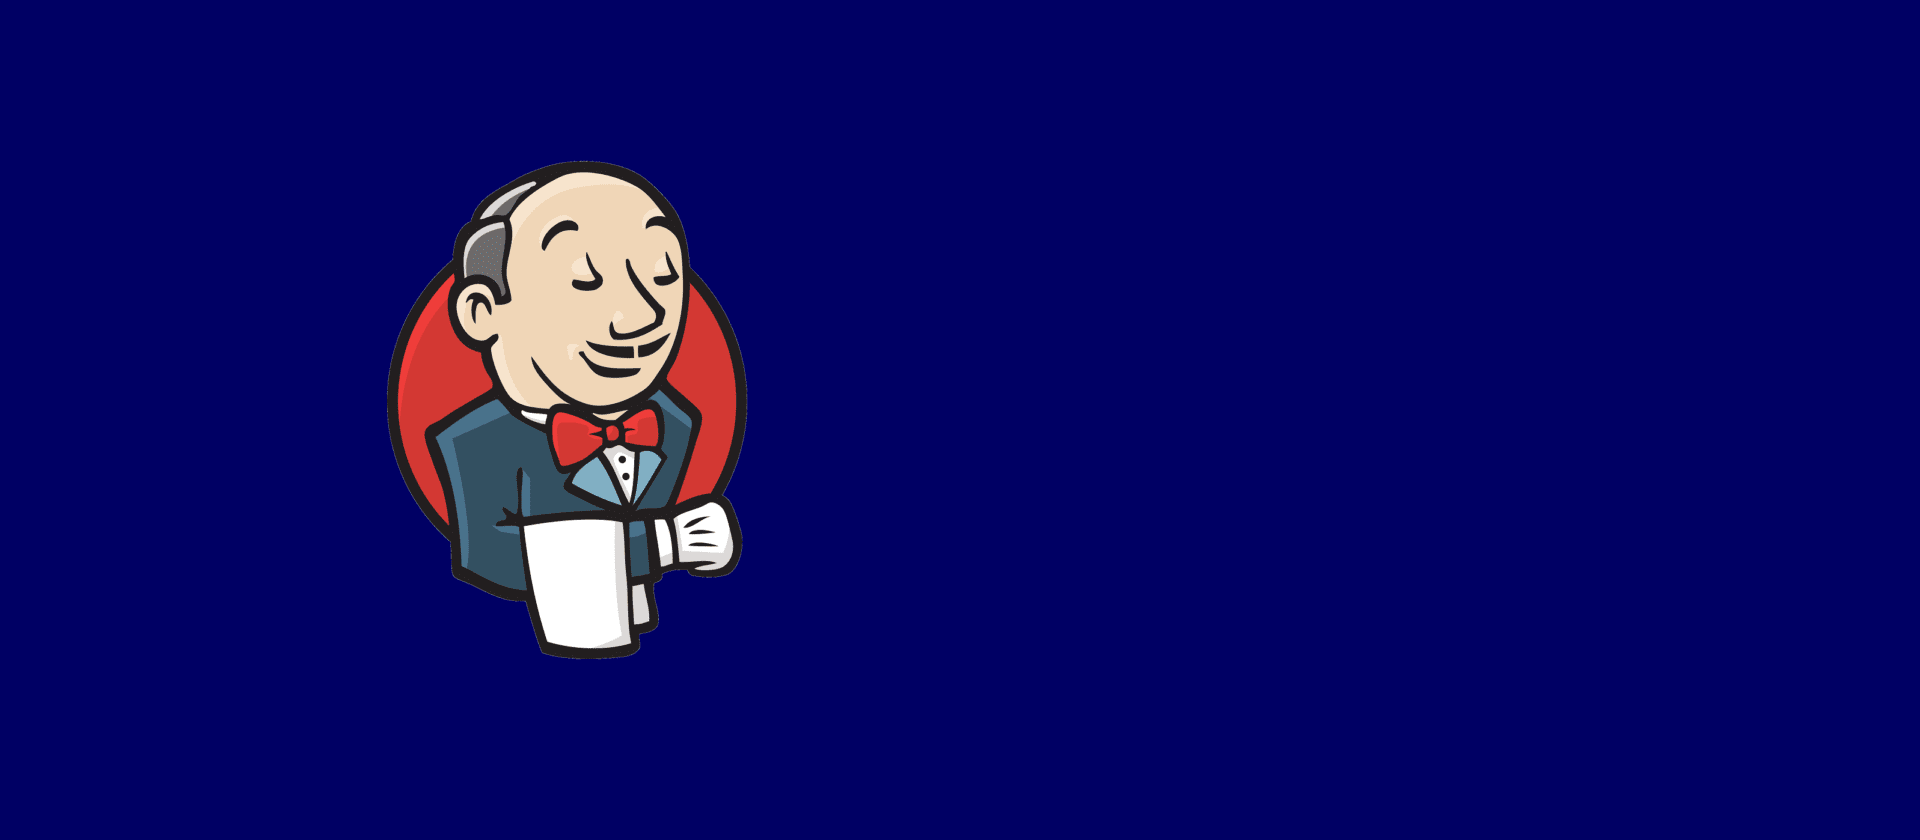 Everything you need to know about Jenkins